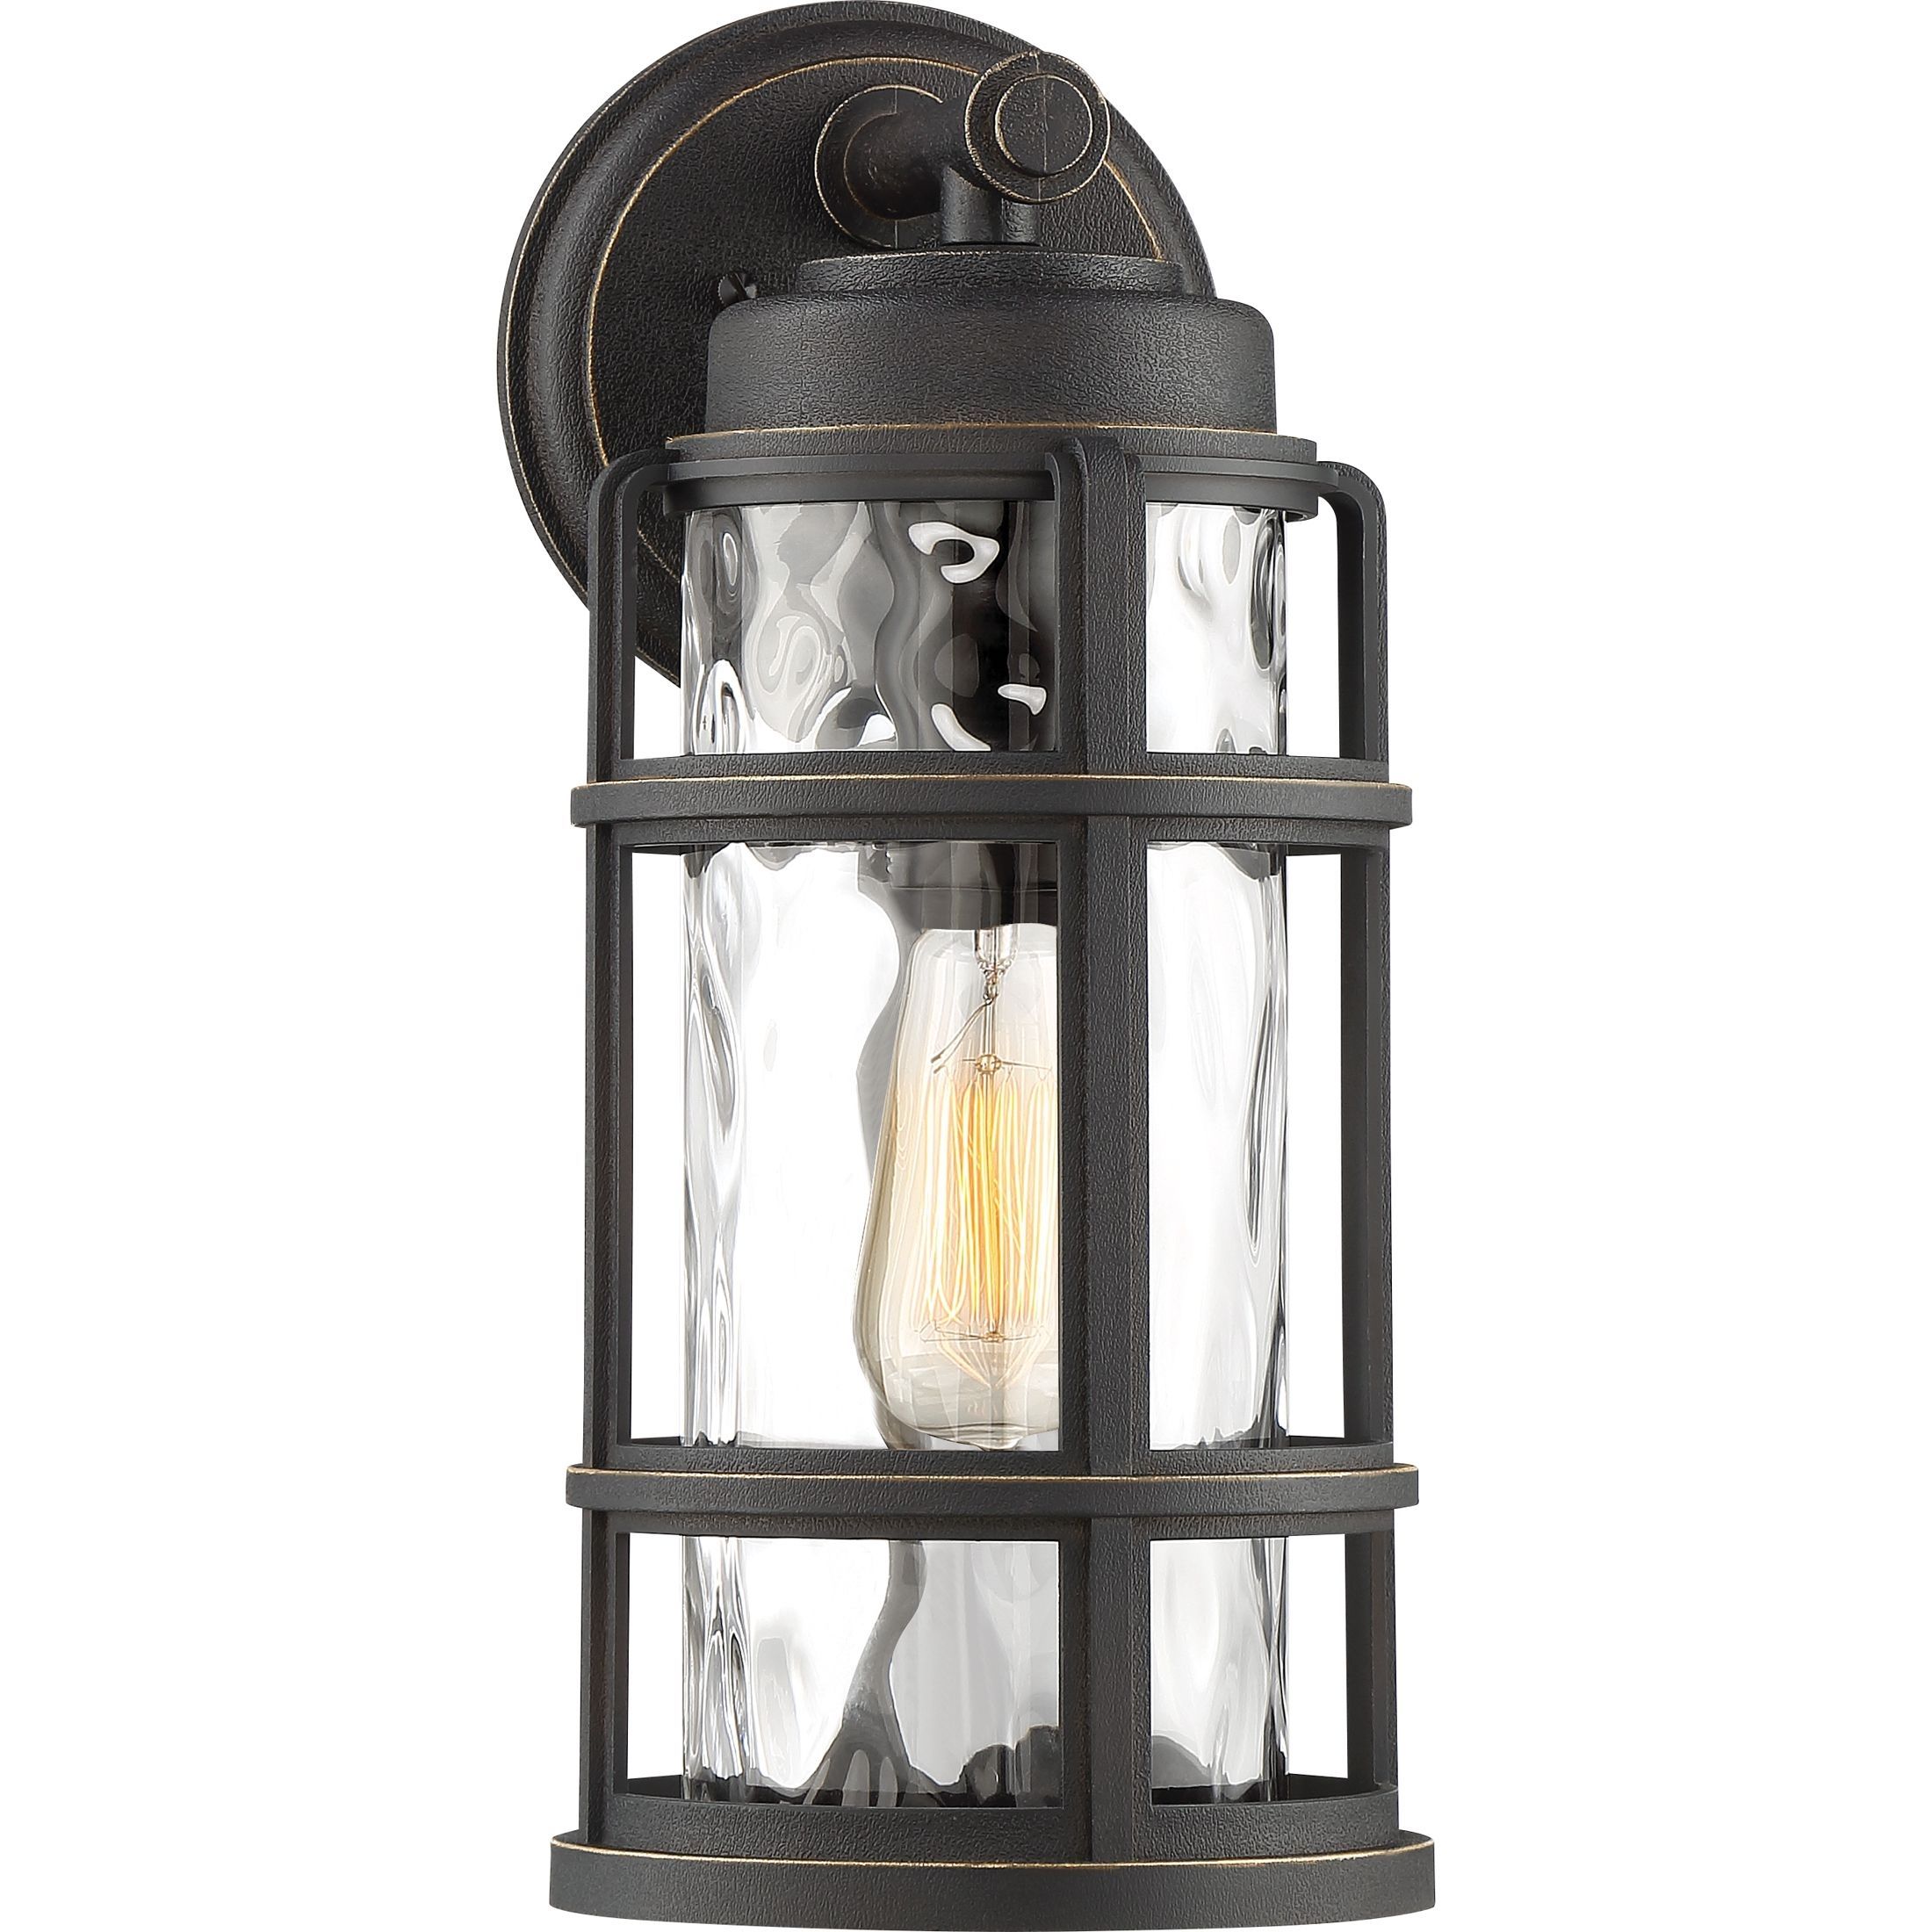 Desoto Outdoor Lantern | Quoizel For Quoizel Outdoor Lanterns (View 12 of 20)